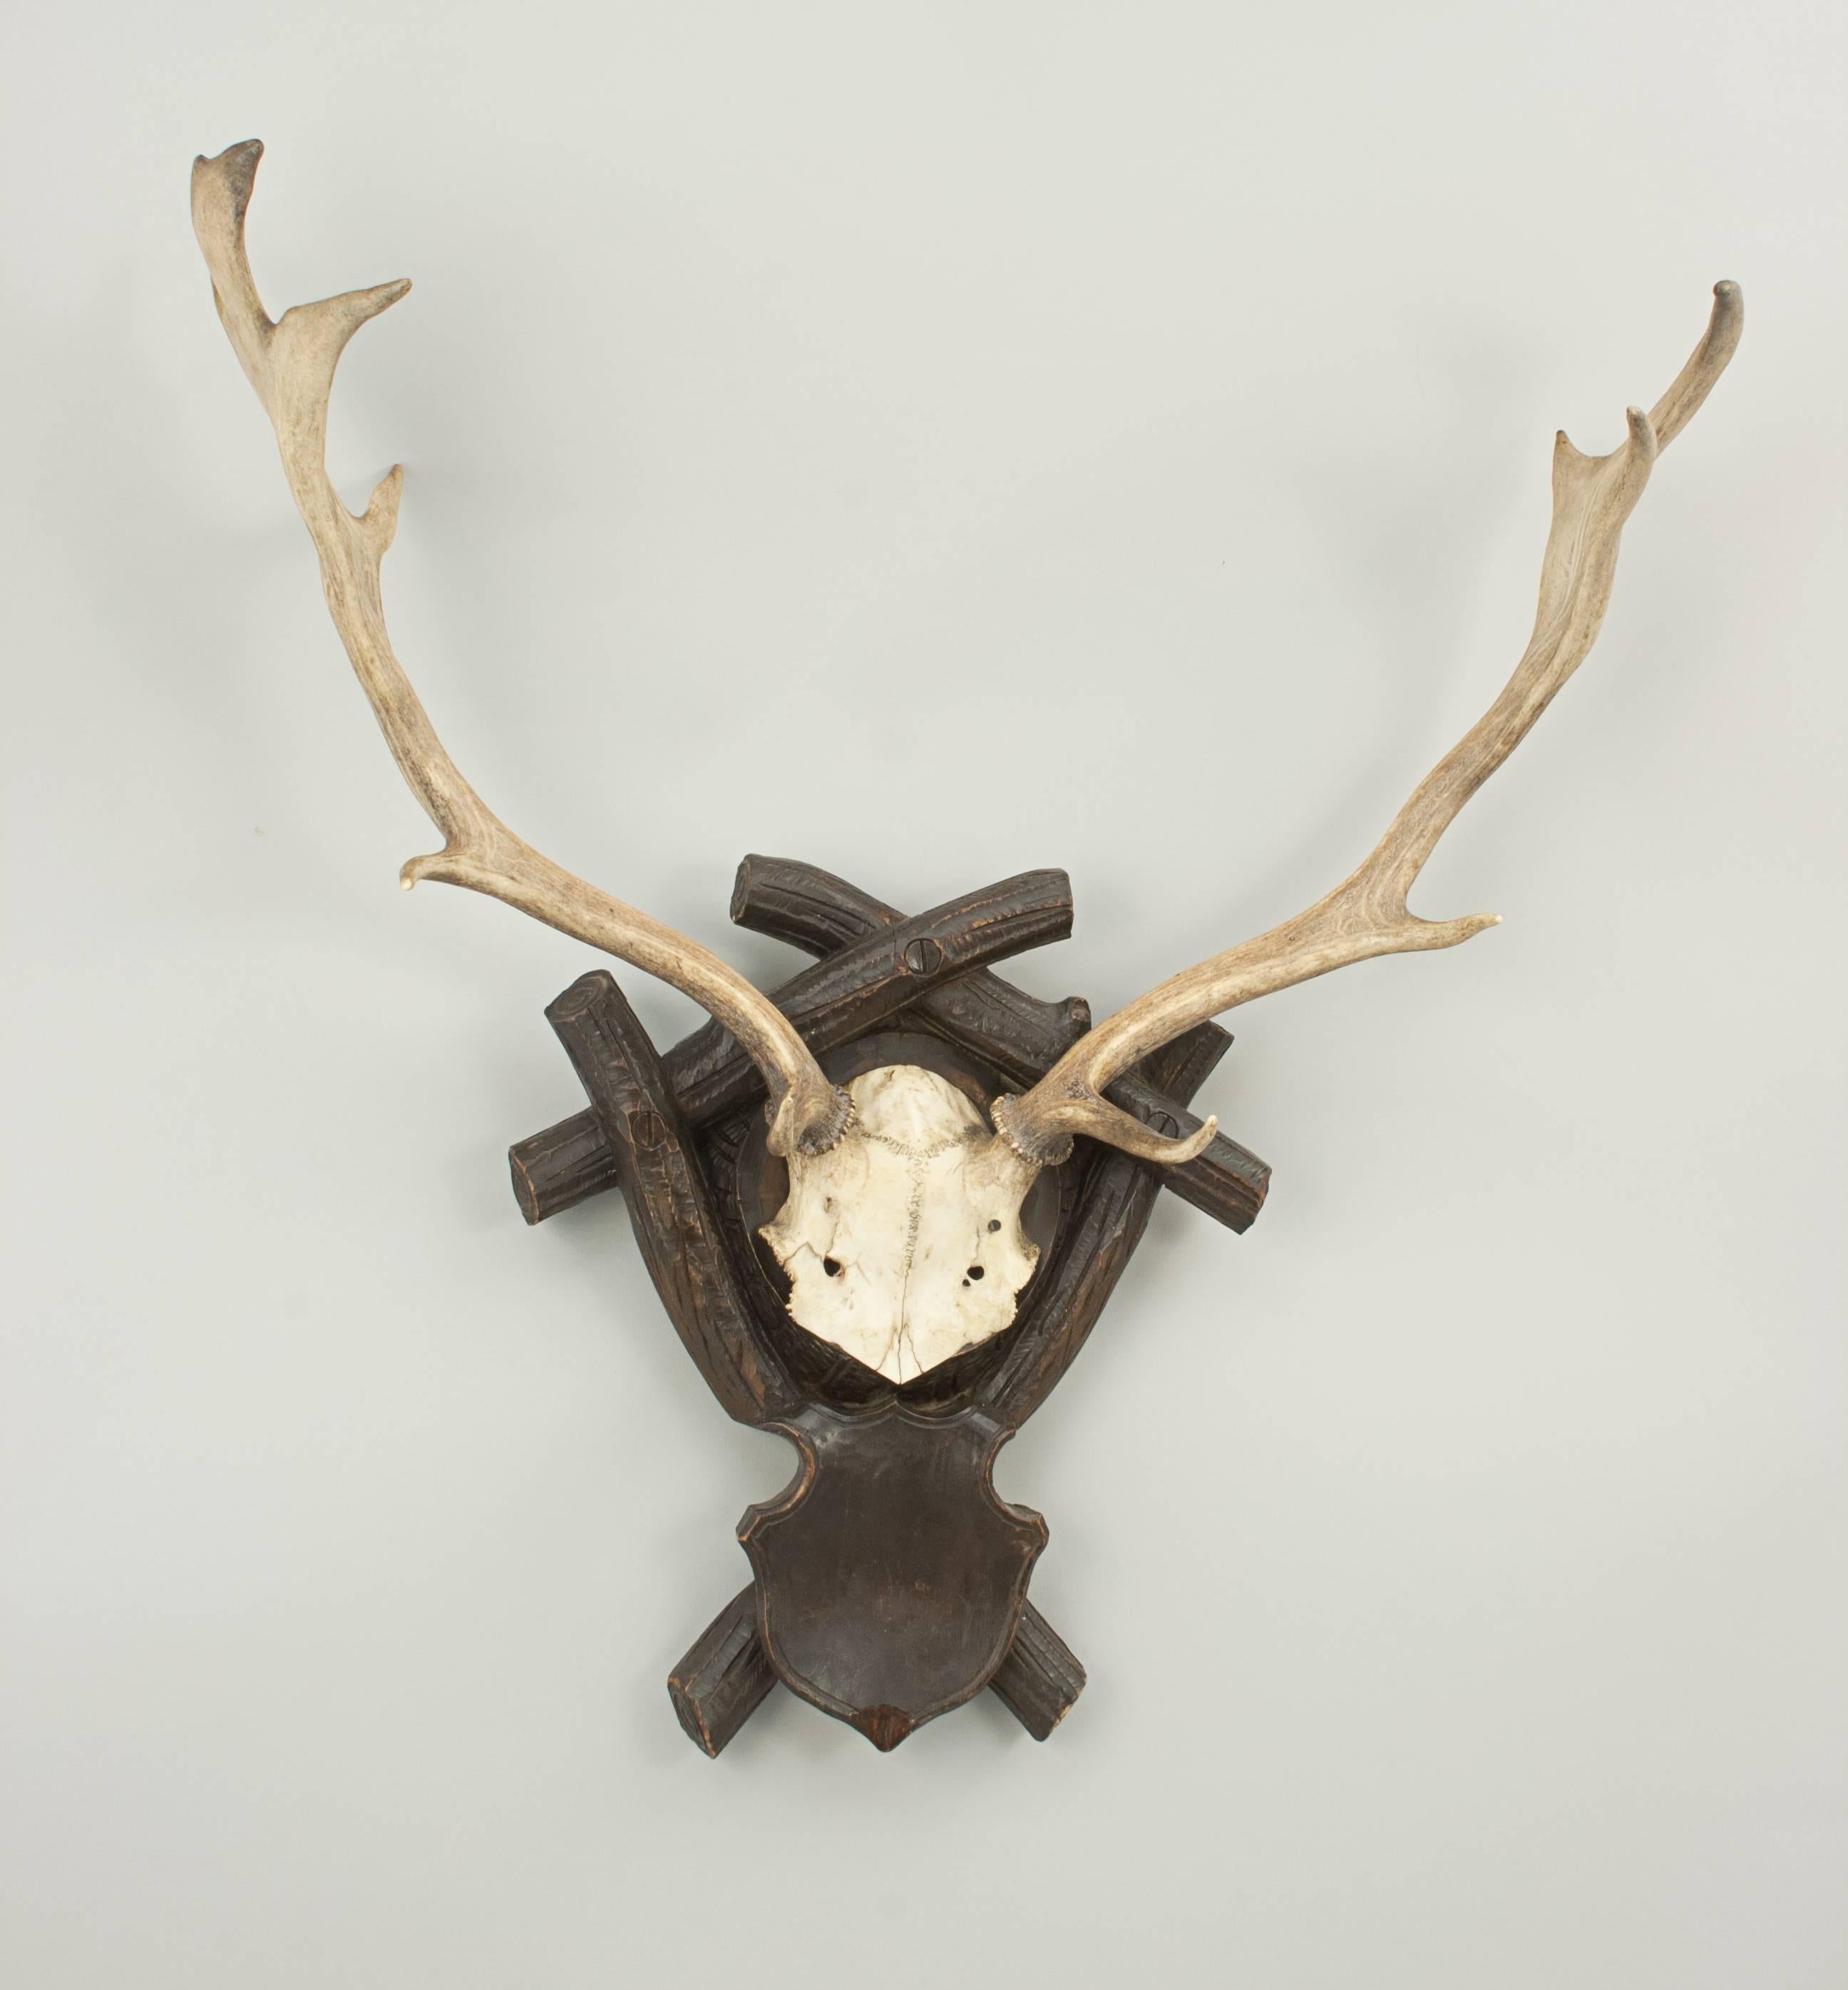 Vintage taxidermy, antlers on shield.
A prepared set of fallow deer antlers with scull cap mounted on a well carved Black Forrest shield. The taxidermist is unknown.